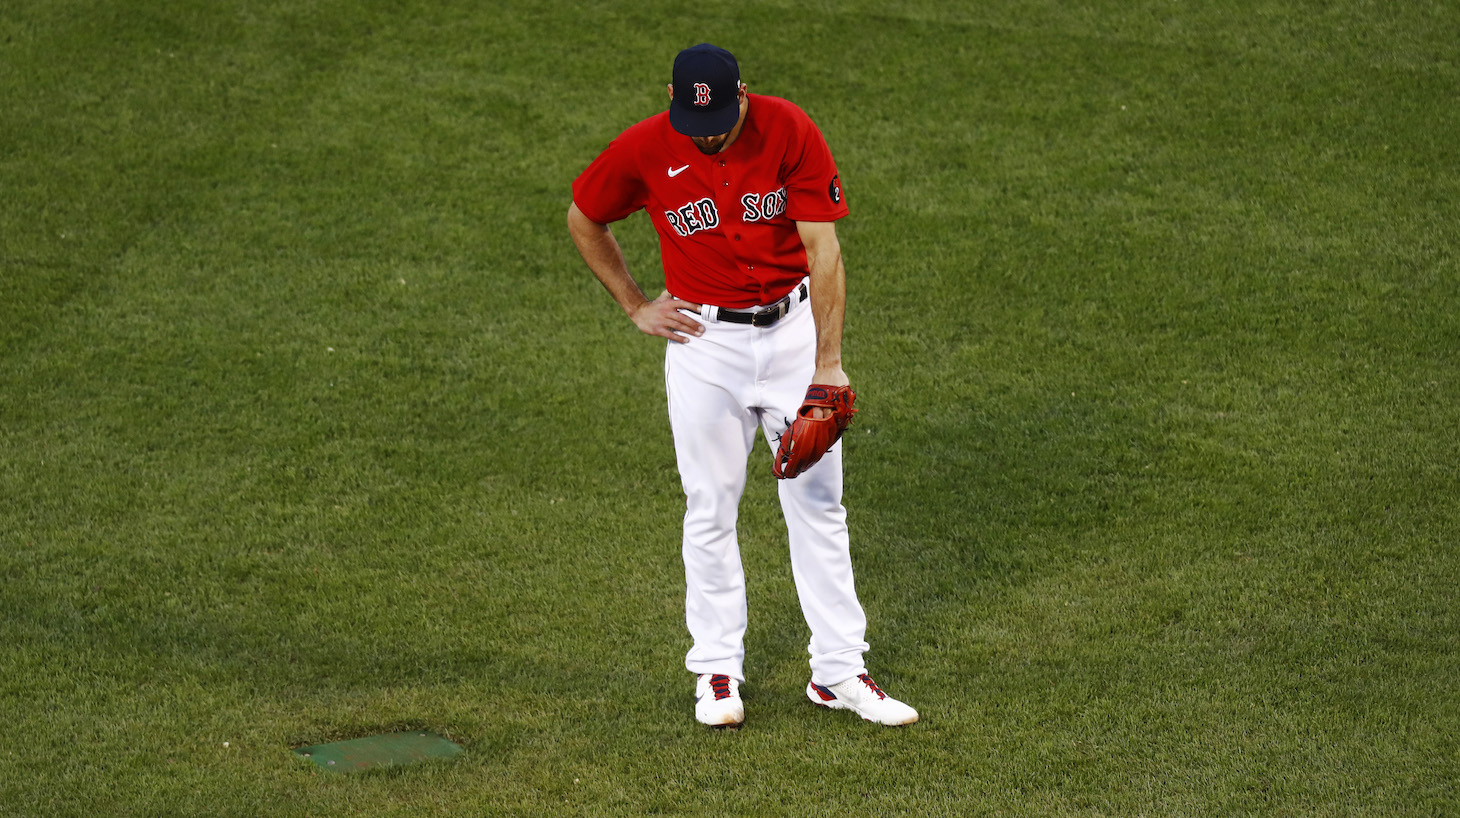 BOSTON, MASSACHUSETTS - MAY 17: Starting pitcher Nathan Eovaldi #17 of the Boston Red Sox reacts during the second inning of the game against the Houston Astros at Fenway Park on May 17, 2022 in Boston, Massachusetts. (Photo by Omar Rawlings/Getty Images)